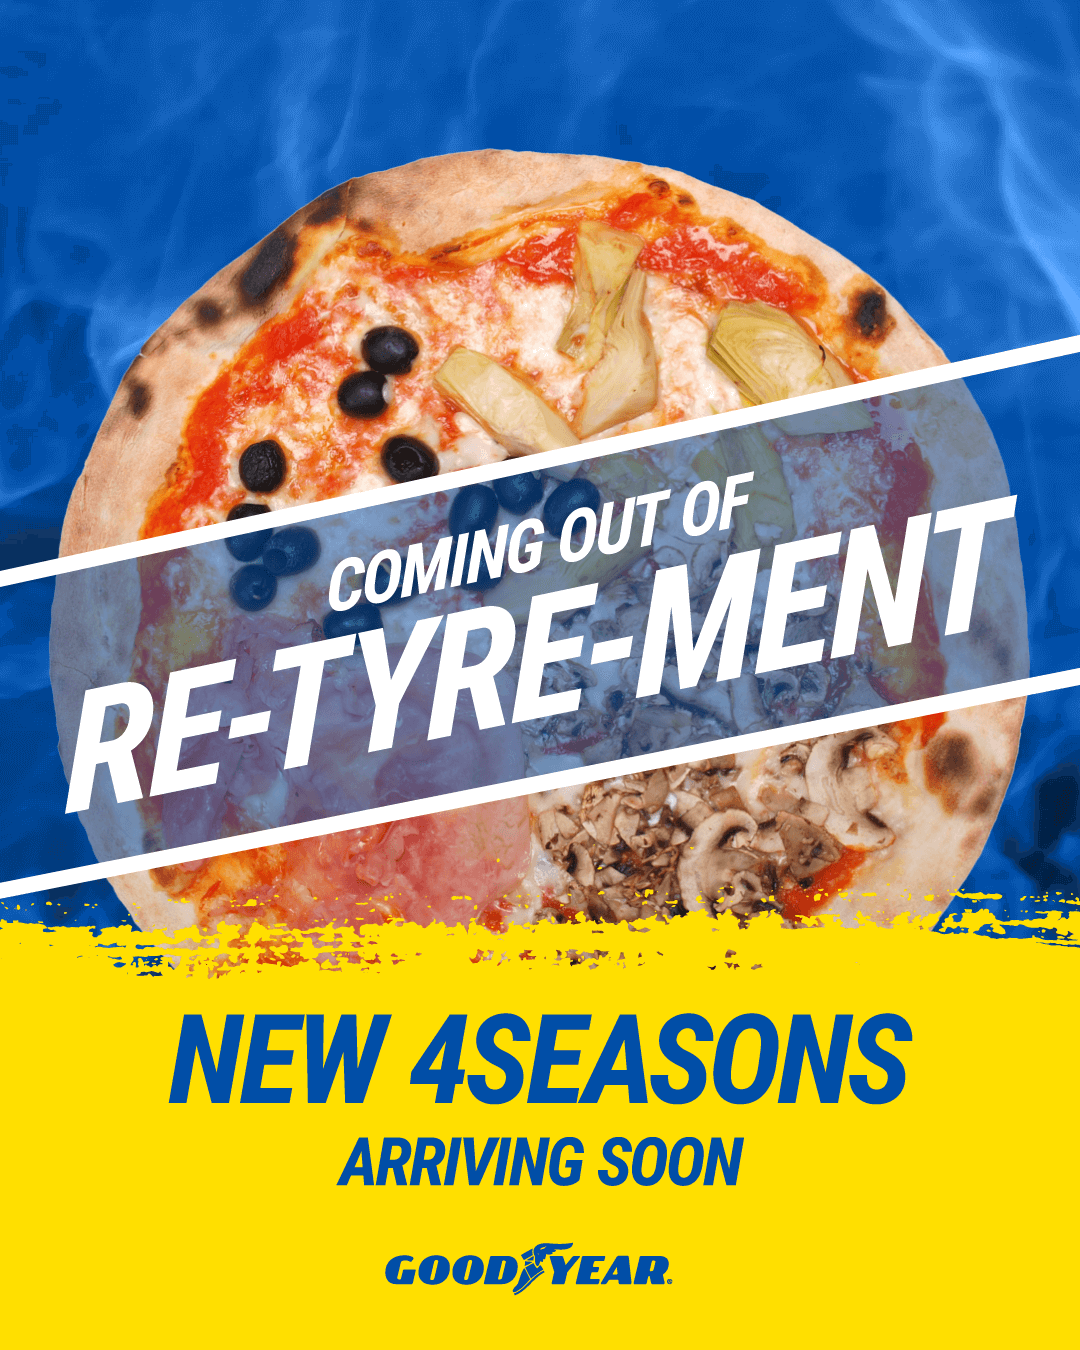 Goodyear Vector 4Seasons Pizza out of re-tyre-ment